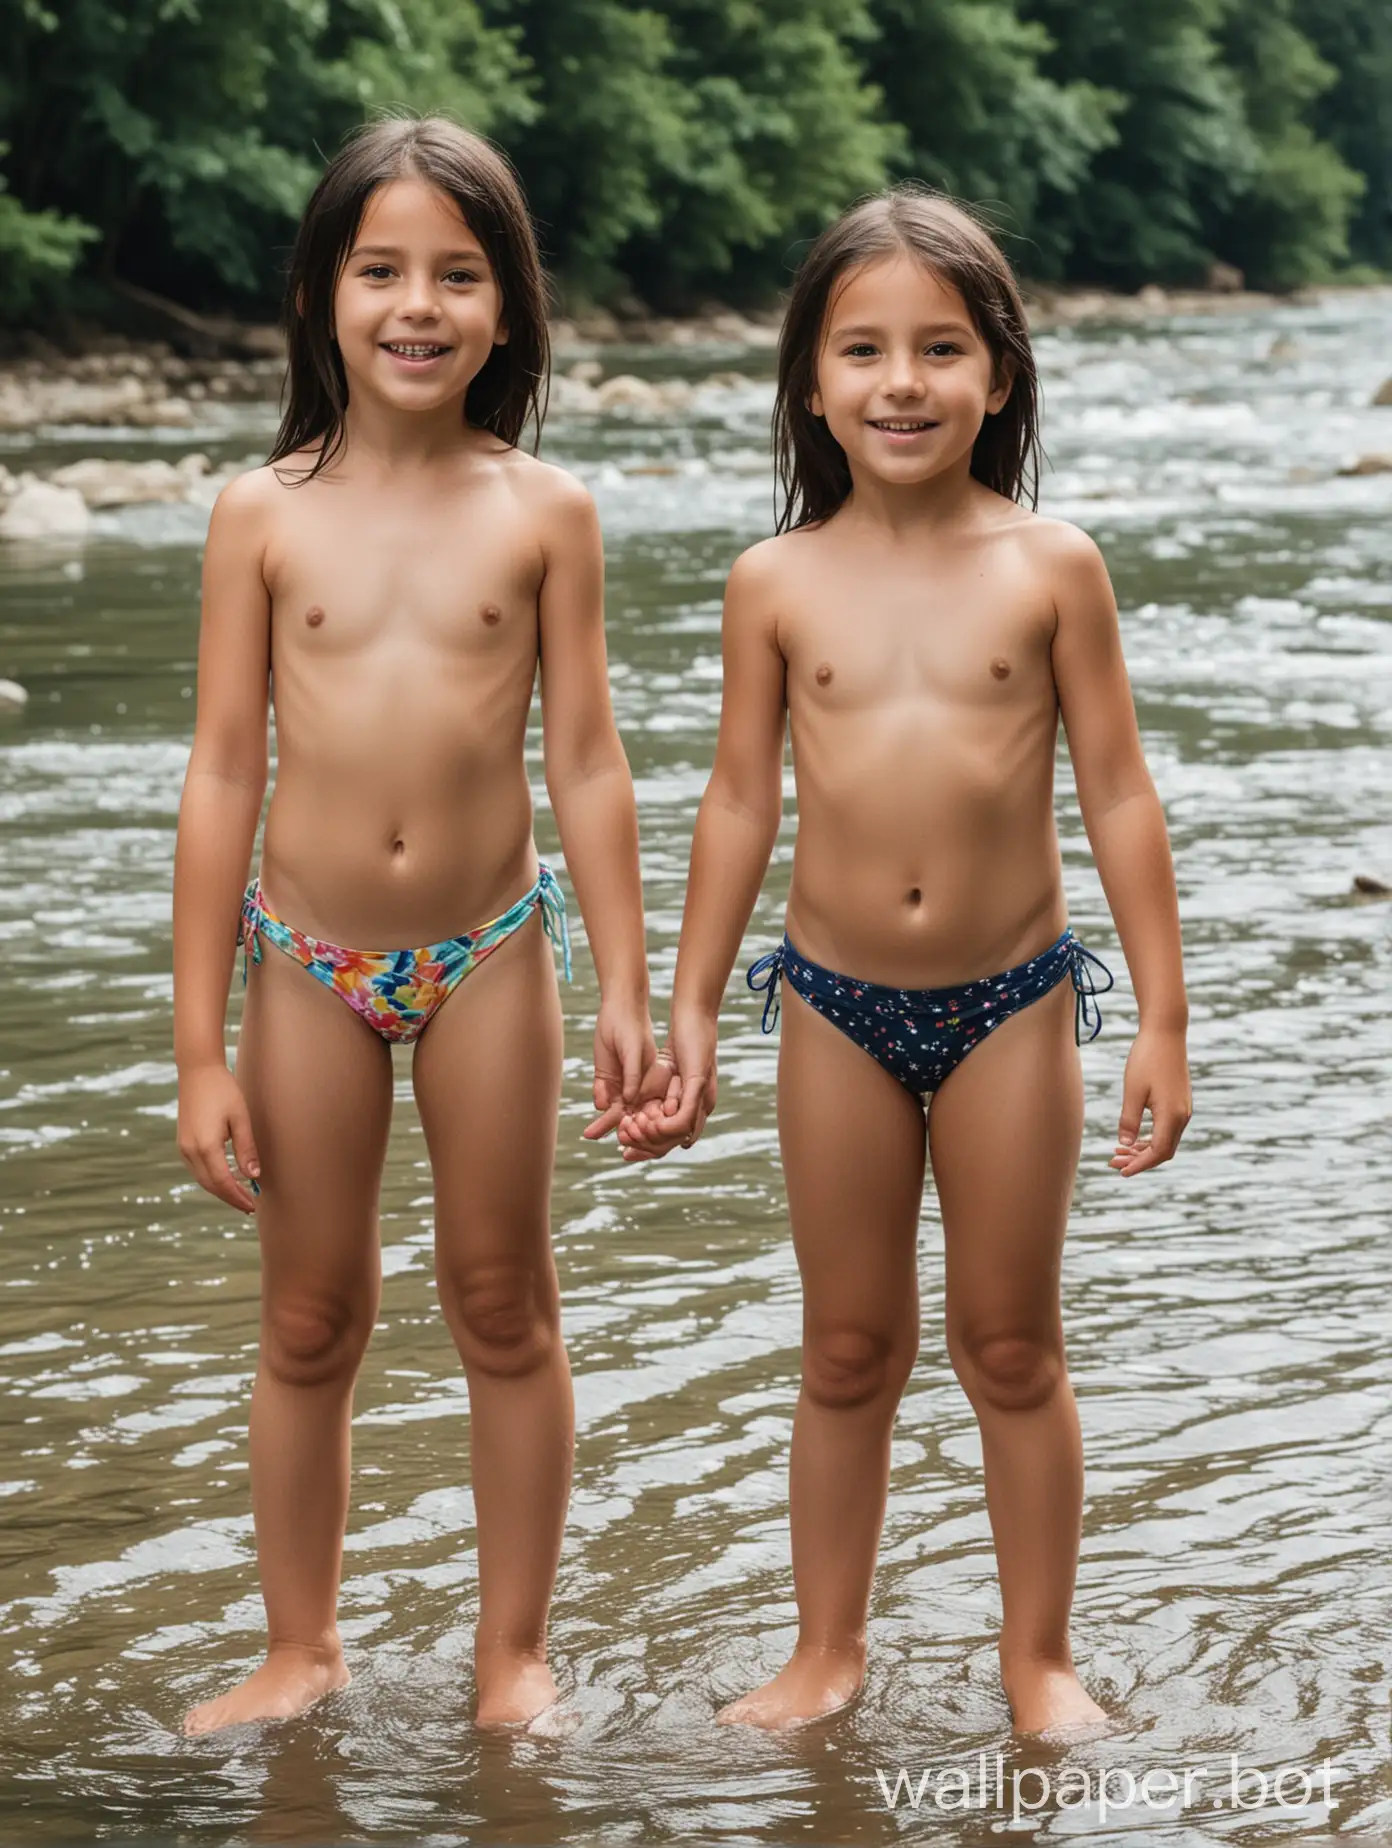 girls with dark hair, one girl is 6 years old and the other girl is 8 years old topless in bikini bottoms, standing in a river